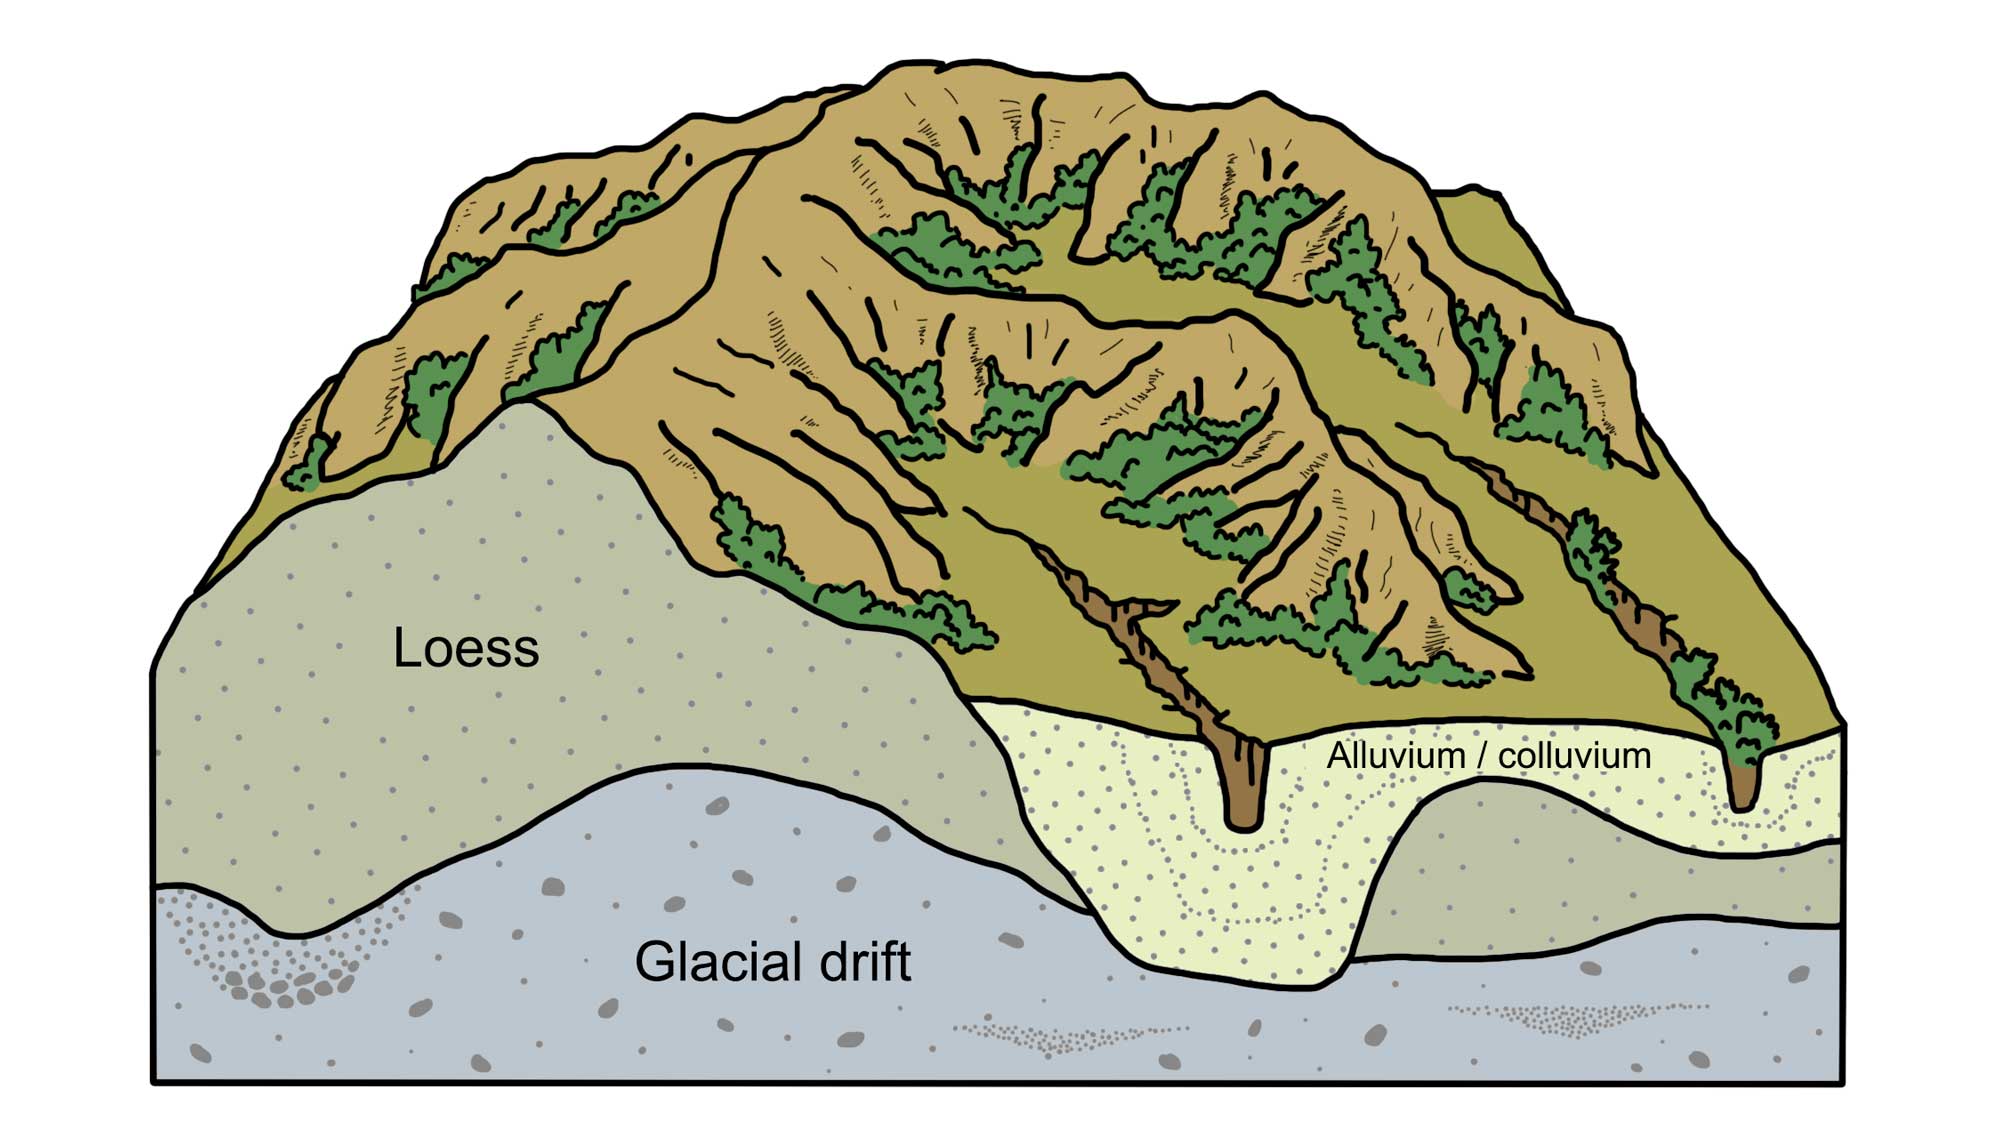 Diagram showing a cross-section of the Loess Hills of Missouri, with loess, glacial drift, and alluvium / colluvium deposits identified.